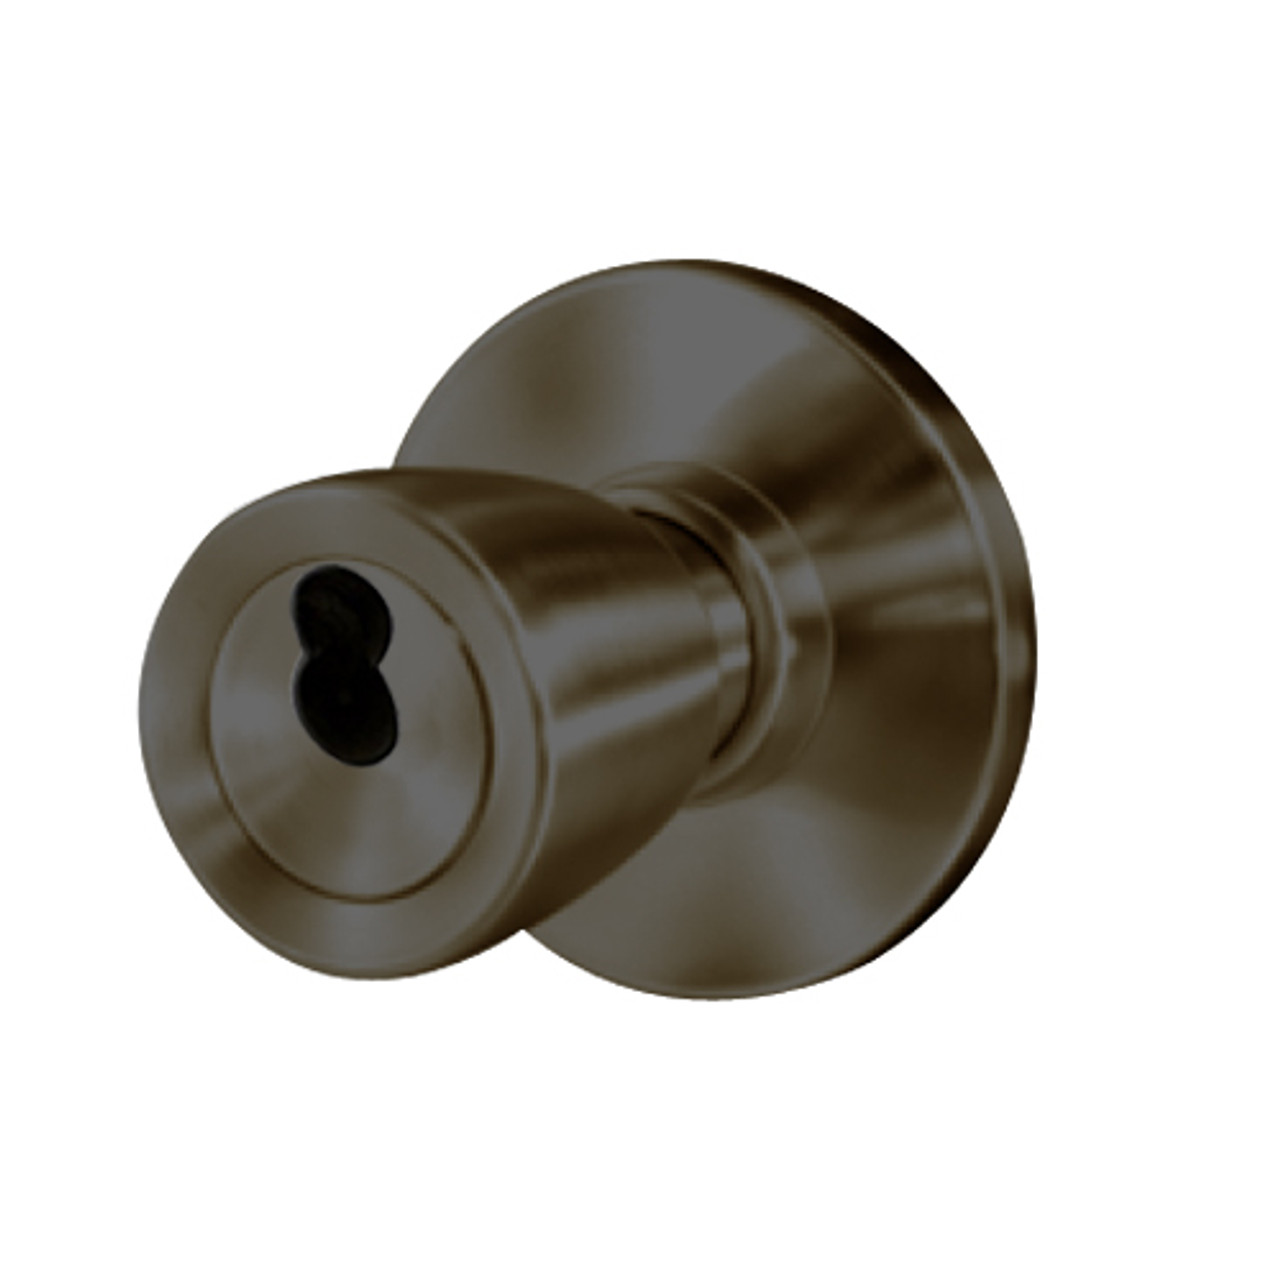 8K37B6AS3613 Best 8K Series Office Heavy Duty Cylindrical Knob Locks with Tulip Style in Oil Rubbed Bronze